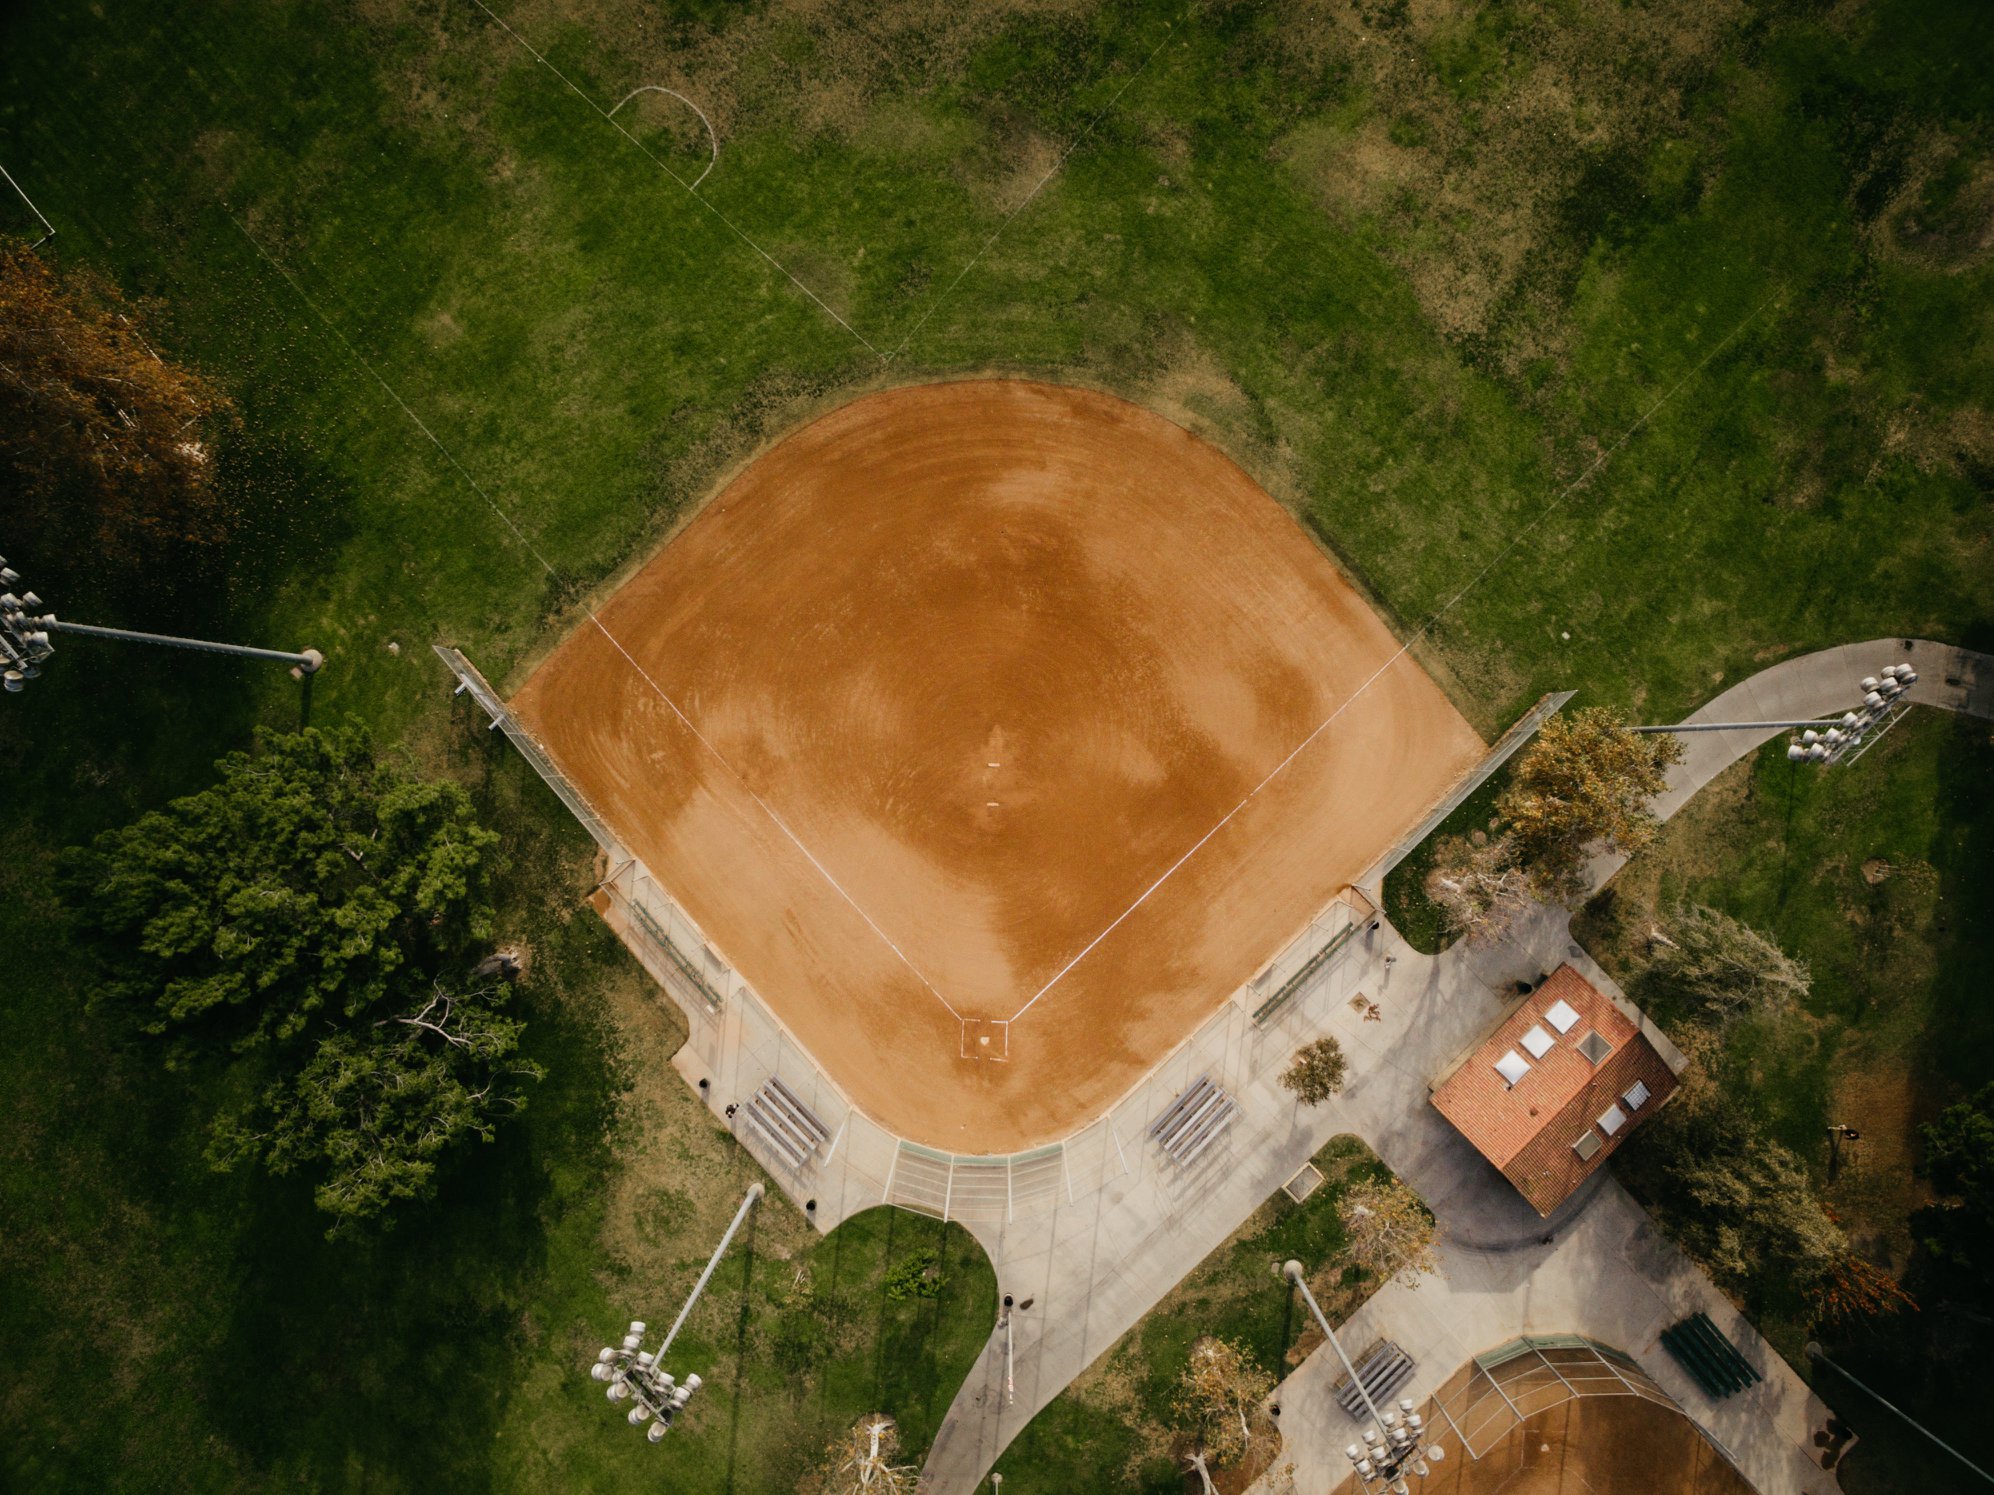 Field of dreams: if you build it, will they come? PHOTO BY FRANCISCO GONZALEZ ON UNSPLASH